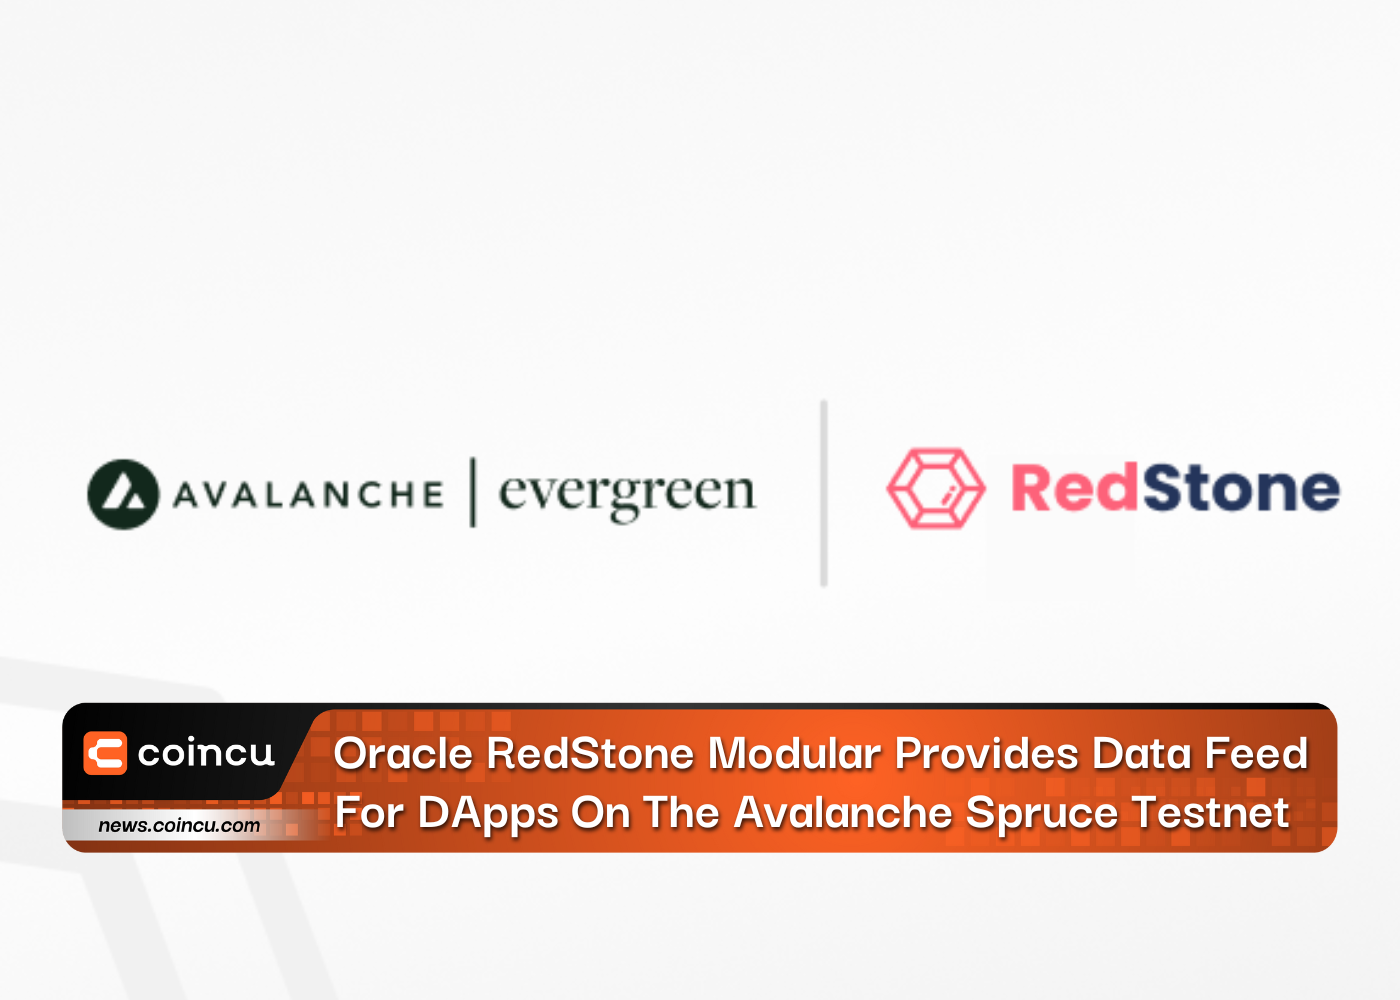 Oracle RedStone Modular Provides Data Feed For DApps On The Avalanche Spruce Testnet